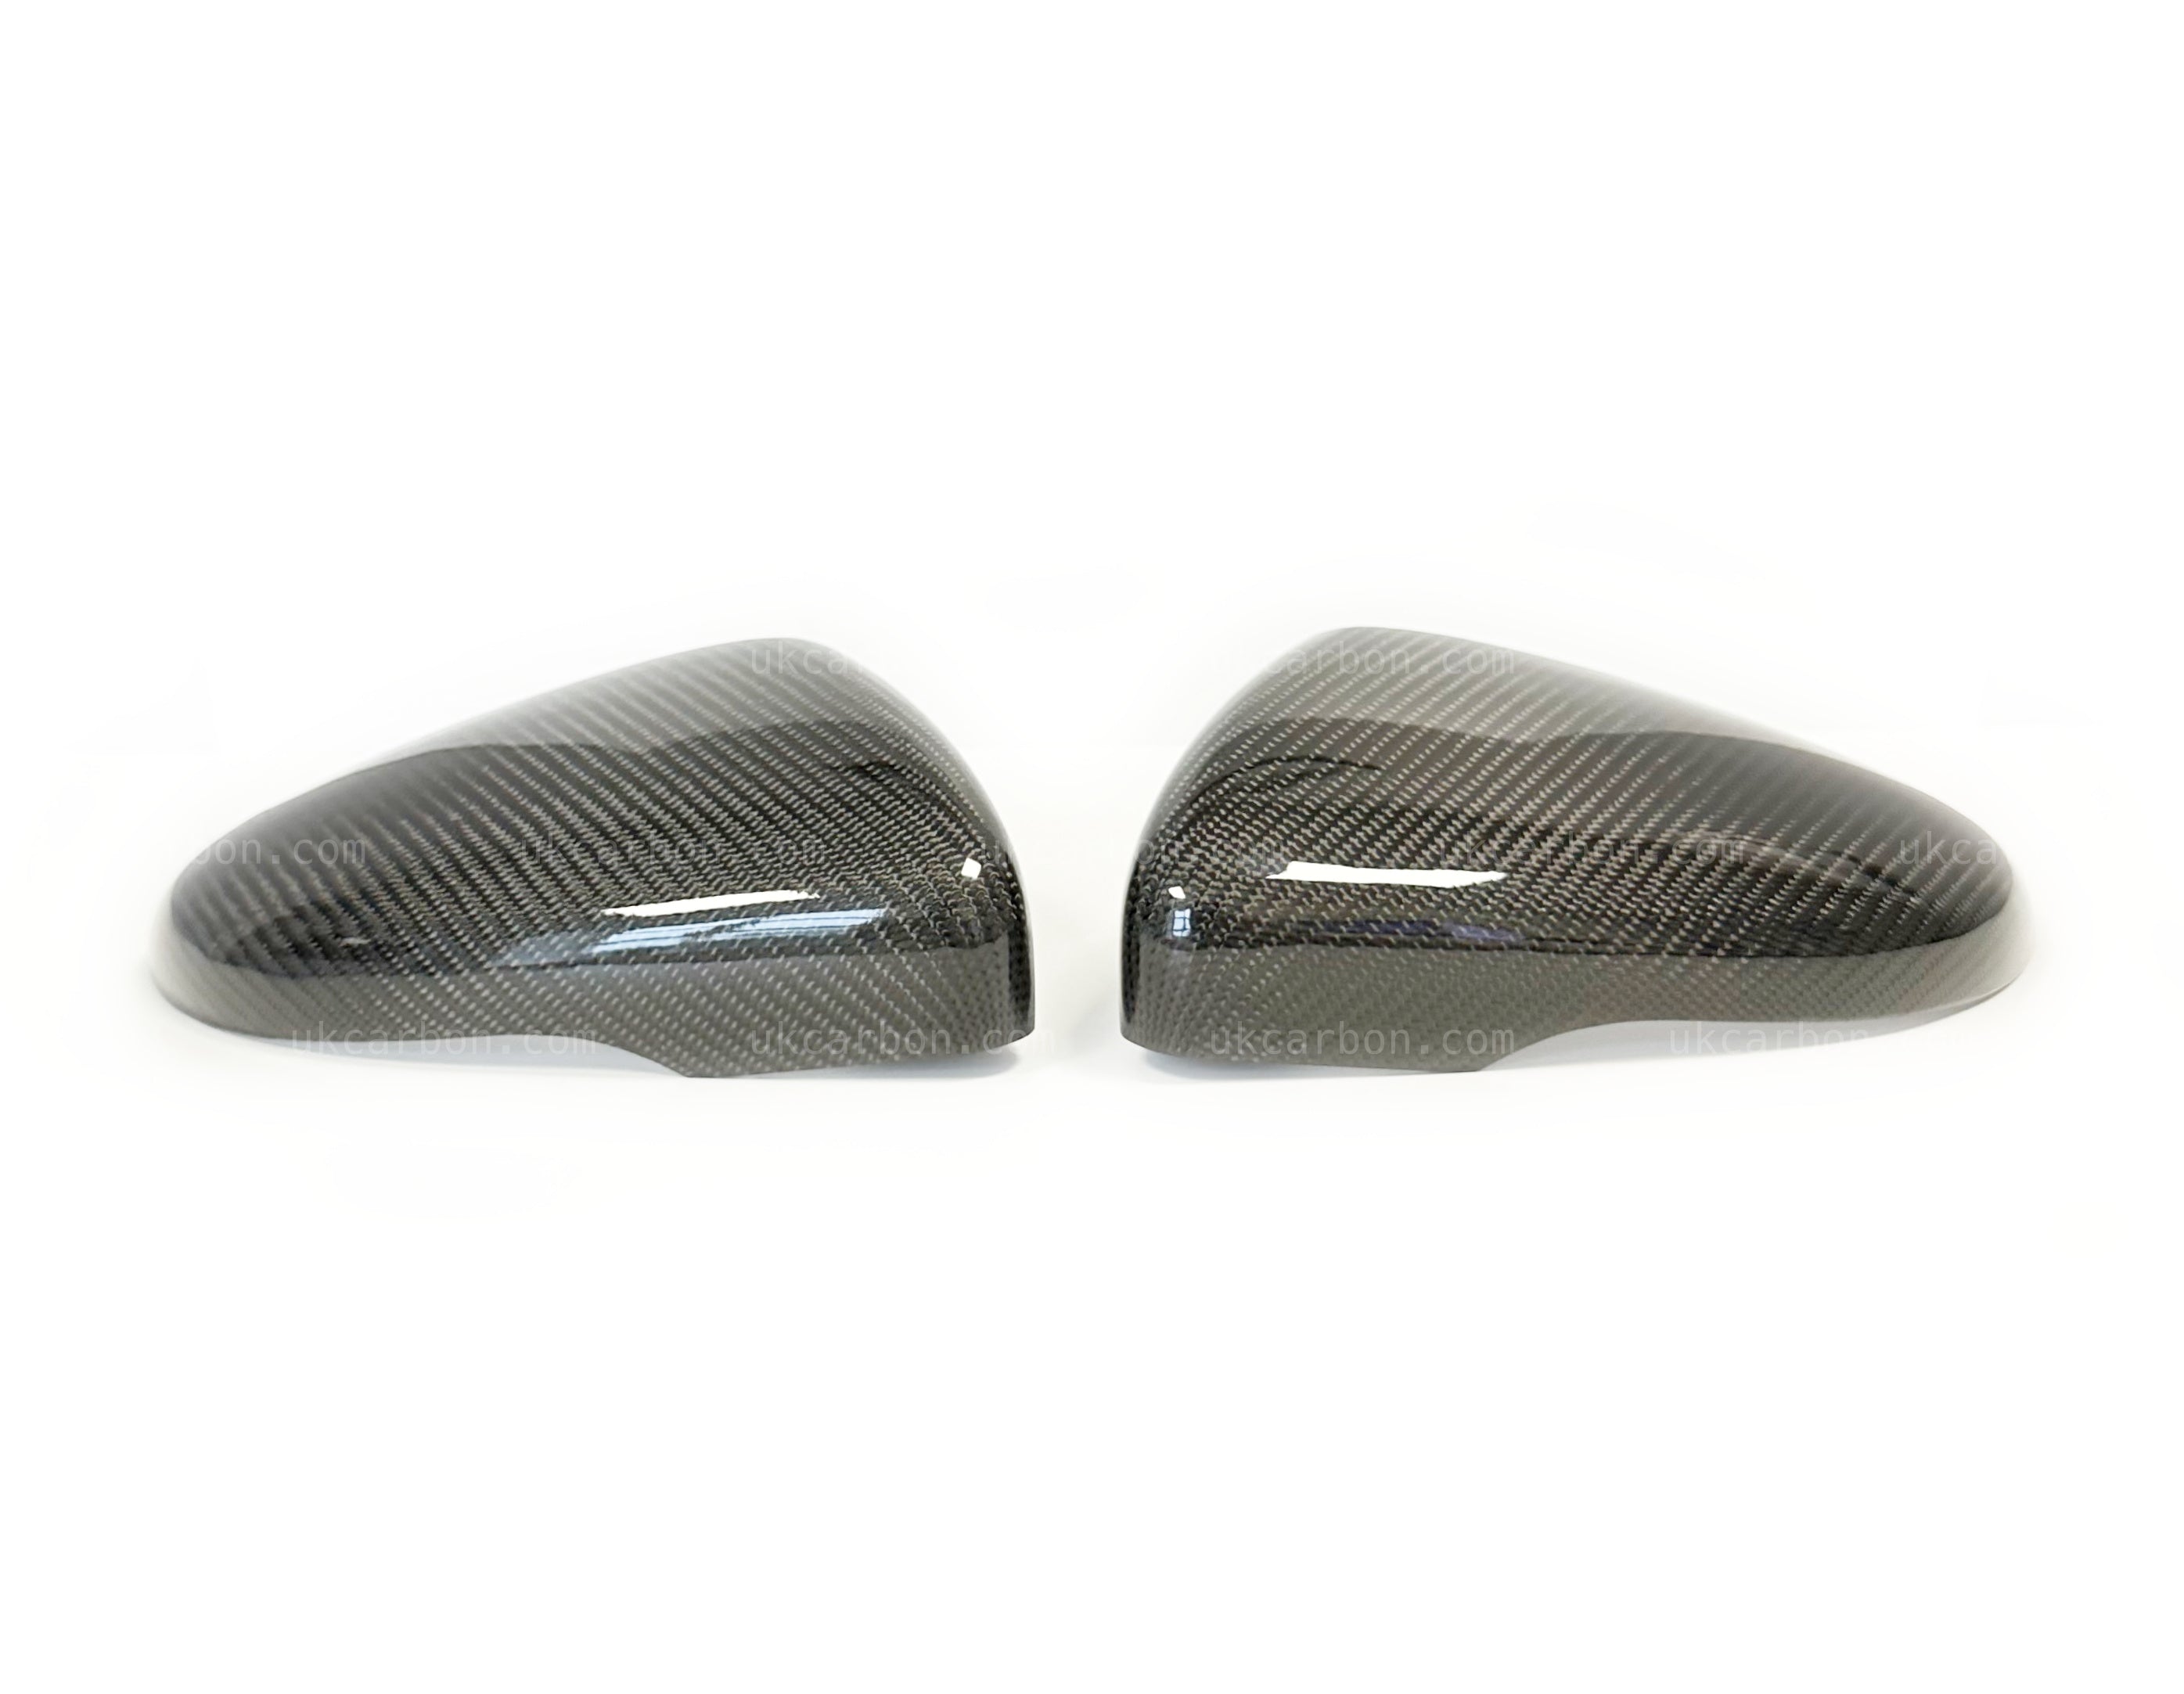 Volkswagen VW Golf GTD TDI MK6 Carbon Wing Mirror Cover Replacements by UKCarbon